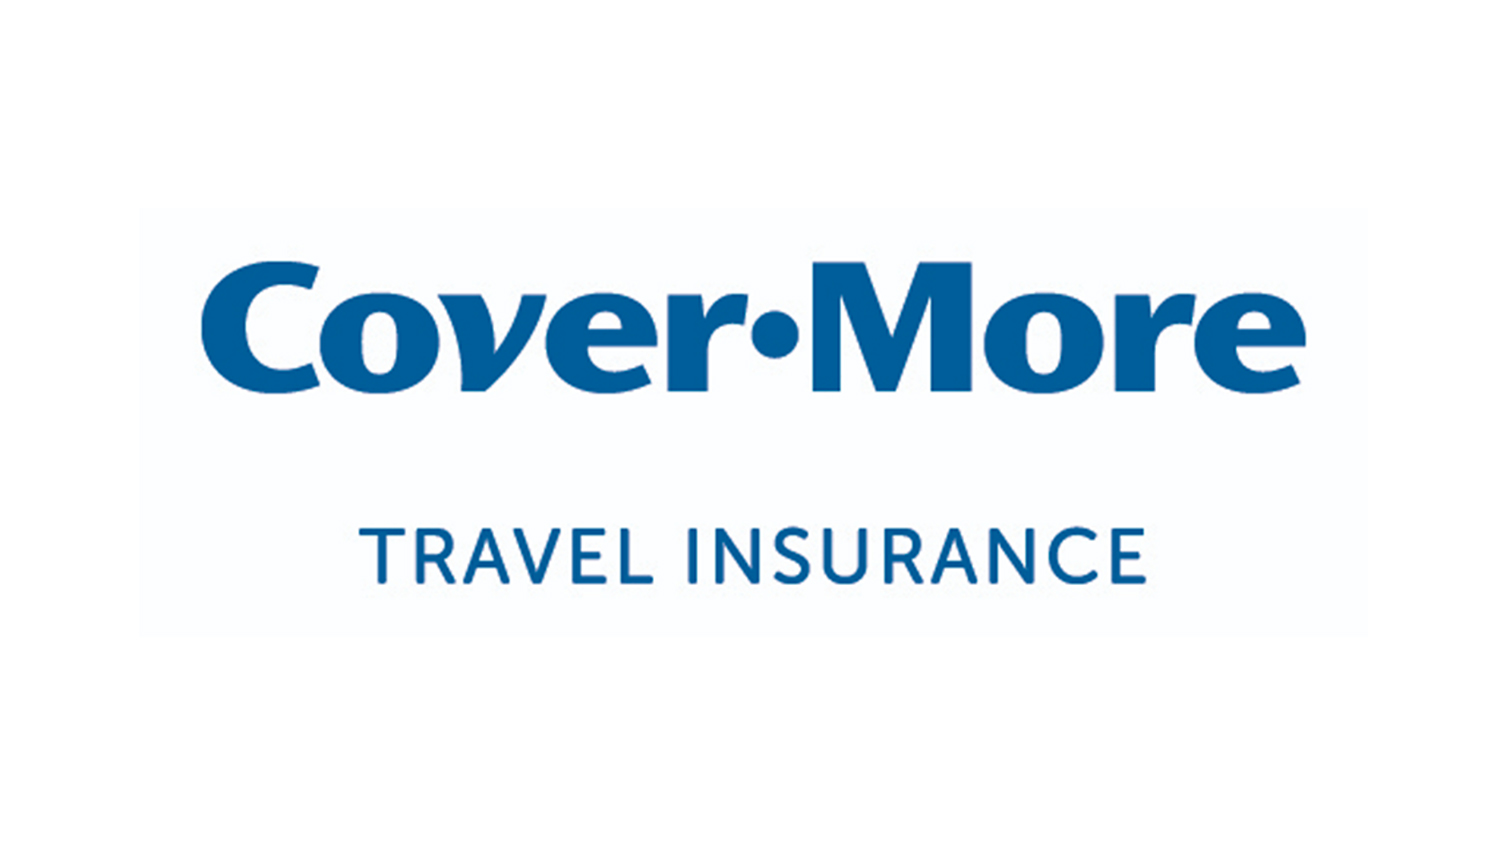 covermore travel insurance terms and conditions